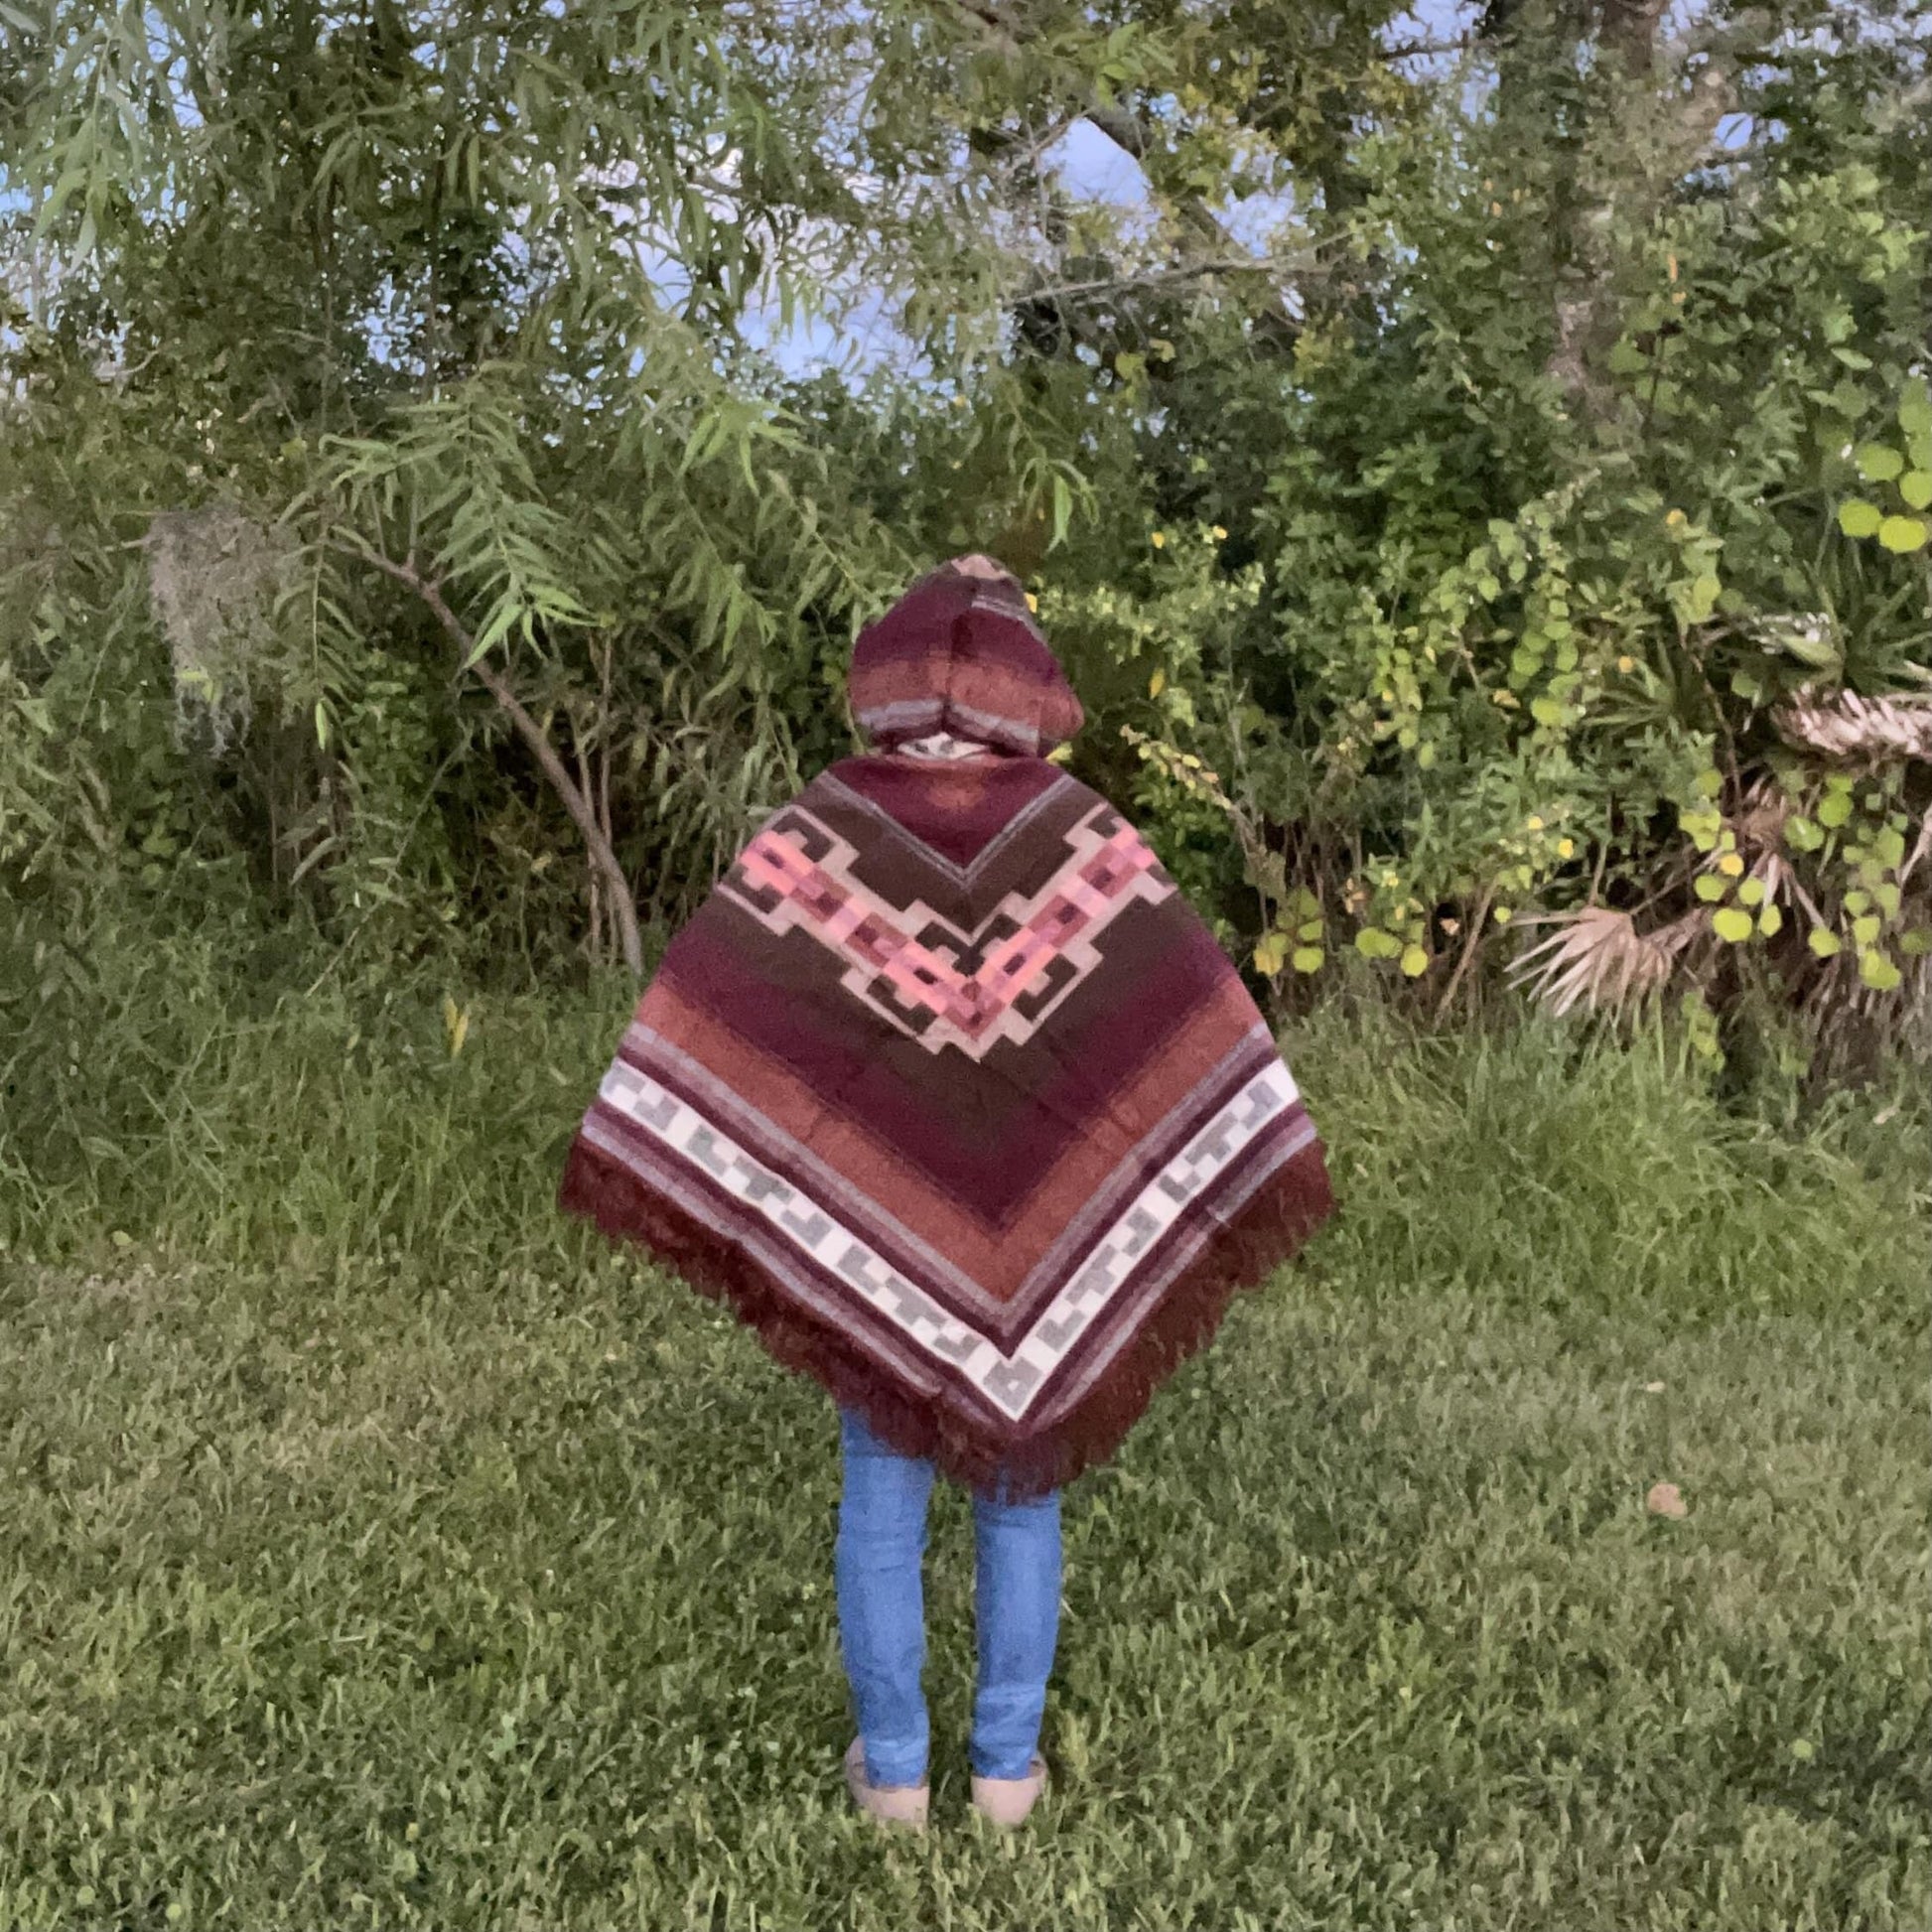 V Shaped Style Hooded Poncho with Fringes | Brown Maroon